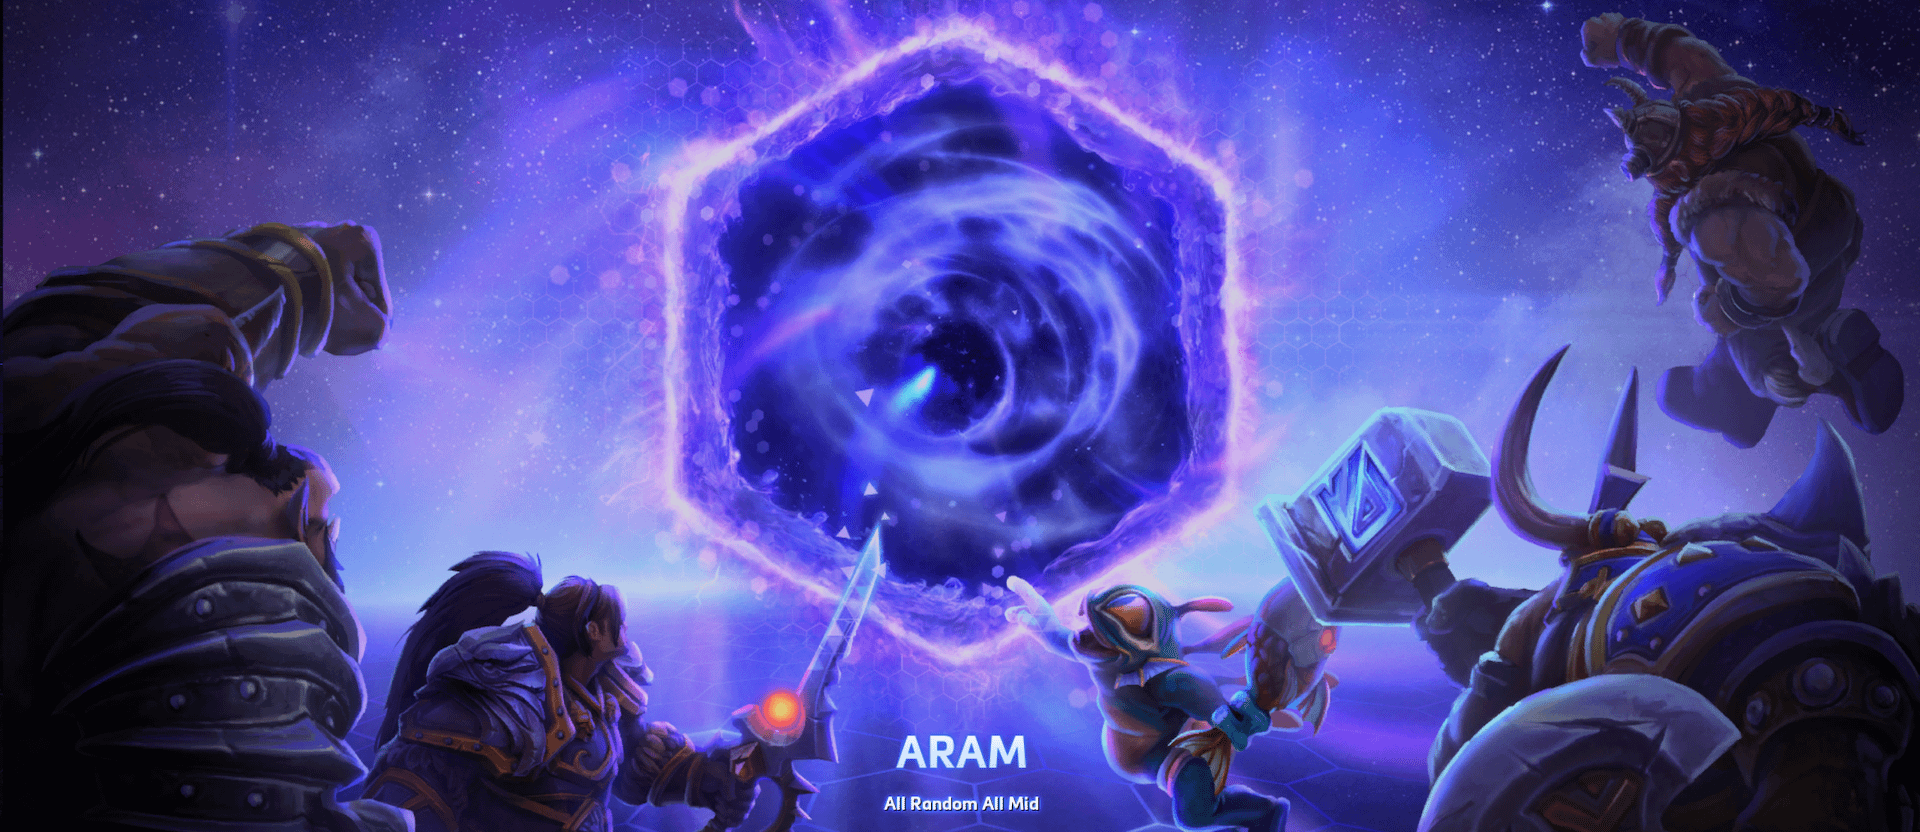 The HOTS ARM loading screen